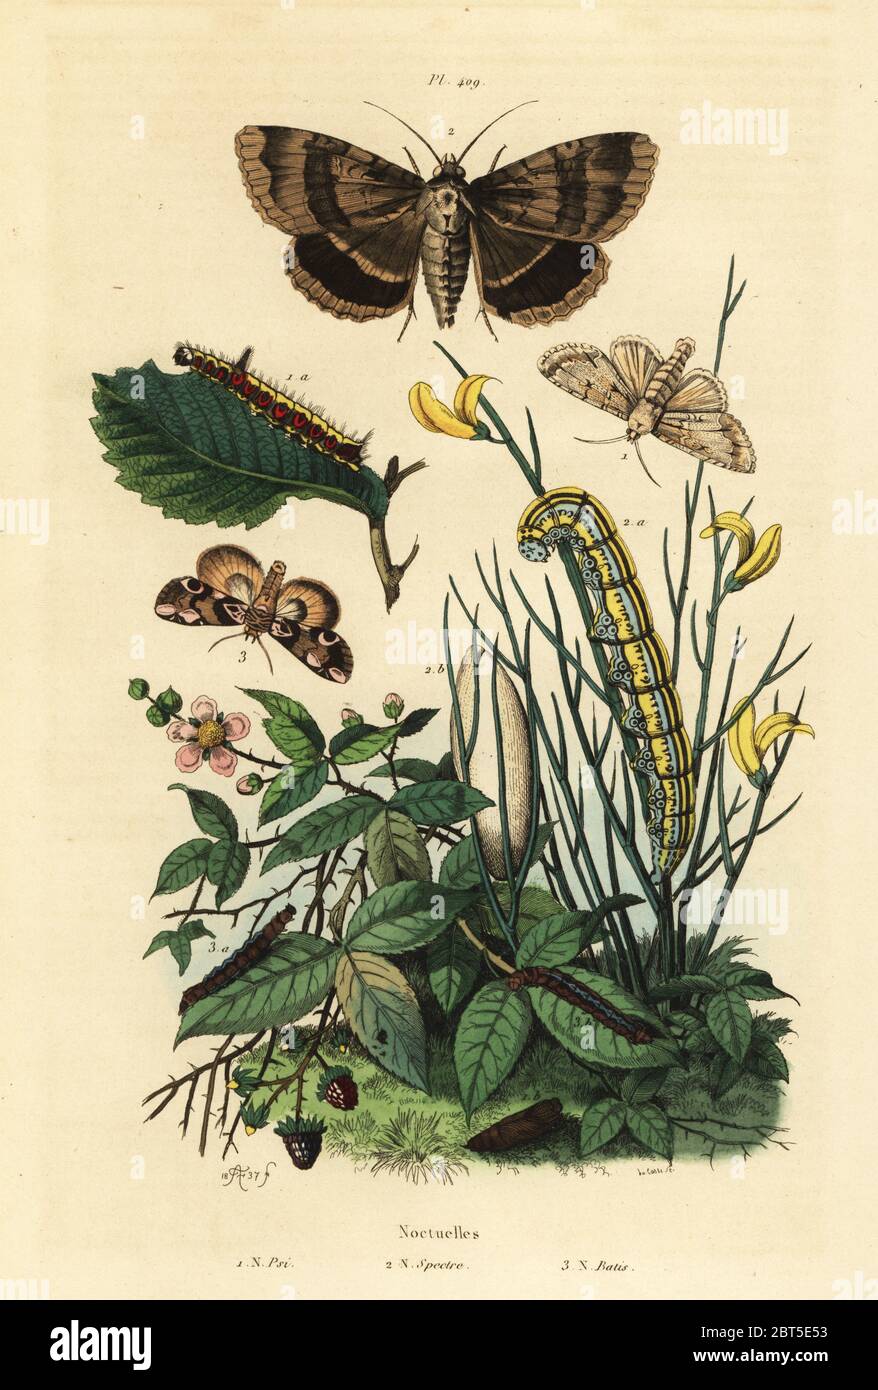 Grey dagger moth and larva, Acronicta psi 1, Apopestes spectrum moth and larva 2, peach blossom moth and caterpillar, Thyatira batis 3. Noctuelles psi, spectre, batis. Handcoloured steel engraving by du Casse after an illustration by Adolph Fries from Felix-Edouard Guerin-Meneville's Dictionnaire Pittoresque d'Histoire Naturelle (Picturesque Dictionary of Natural History), Paris, 1834-39. Stock Photo